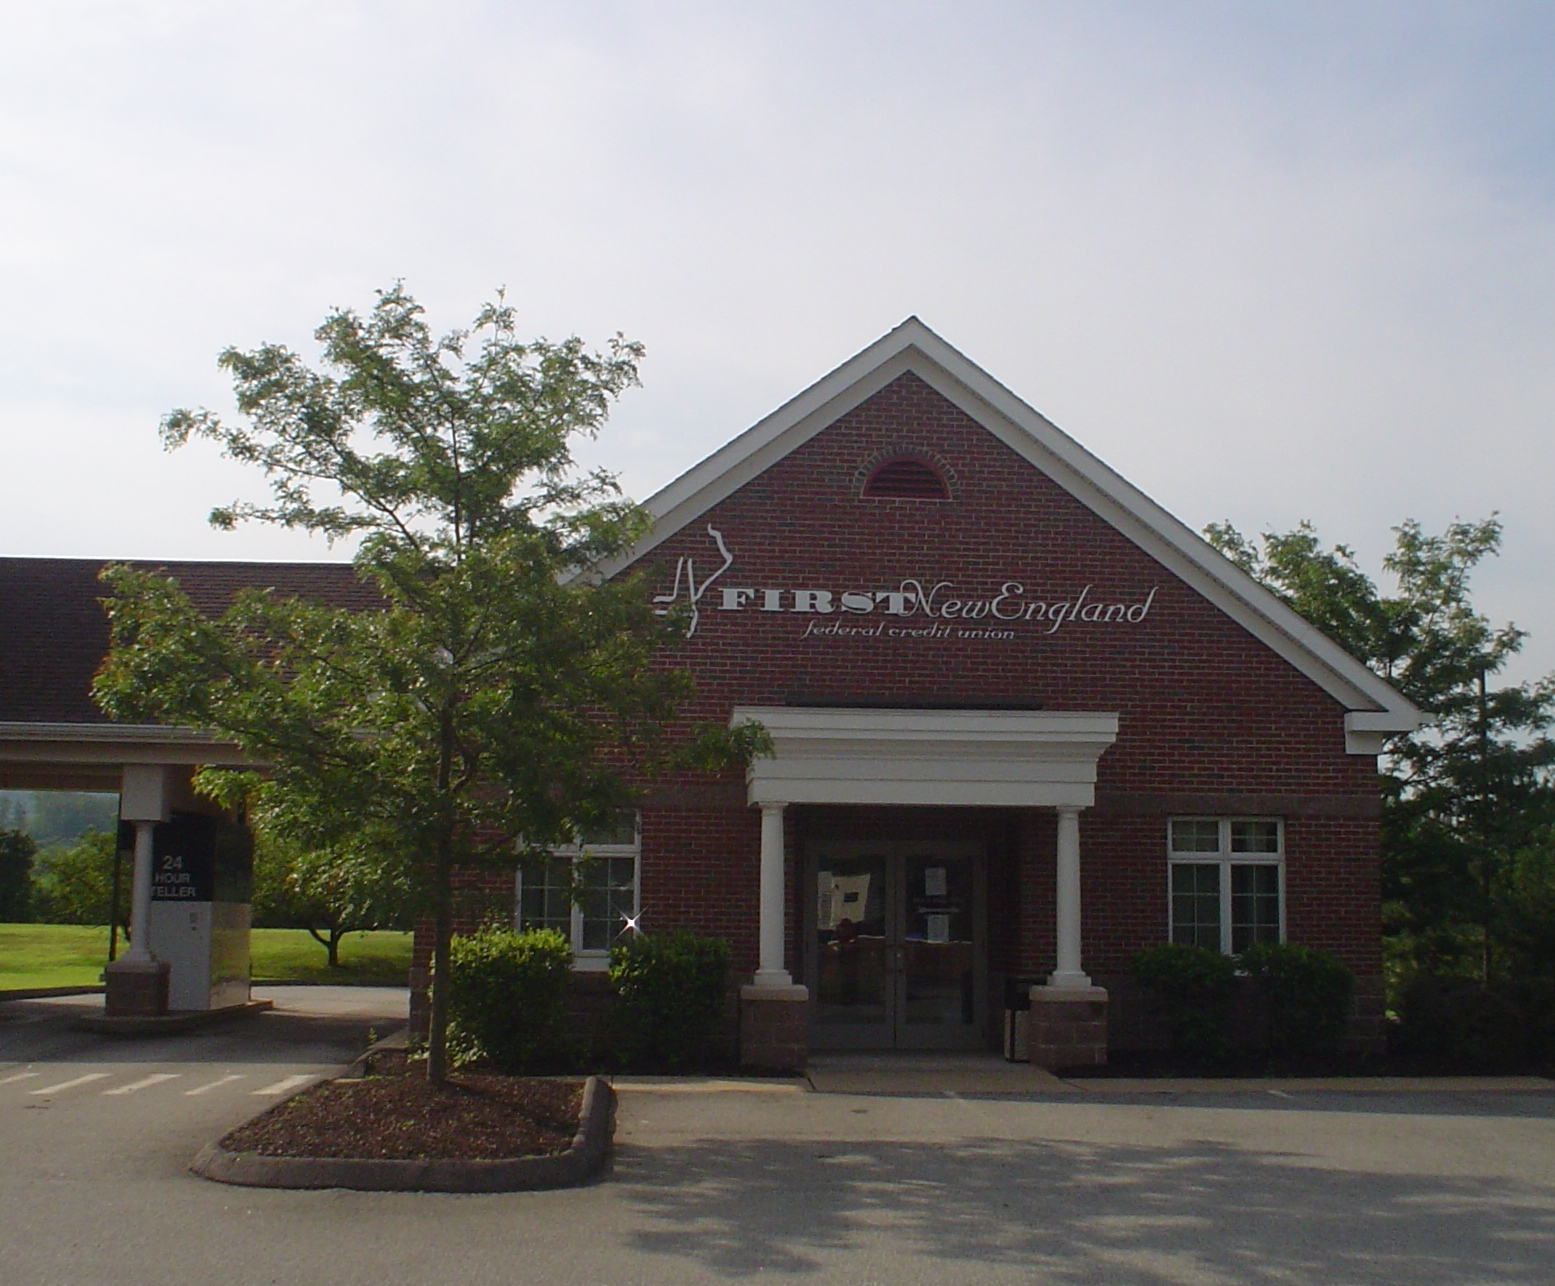 First New England Federal Credit Union